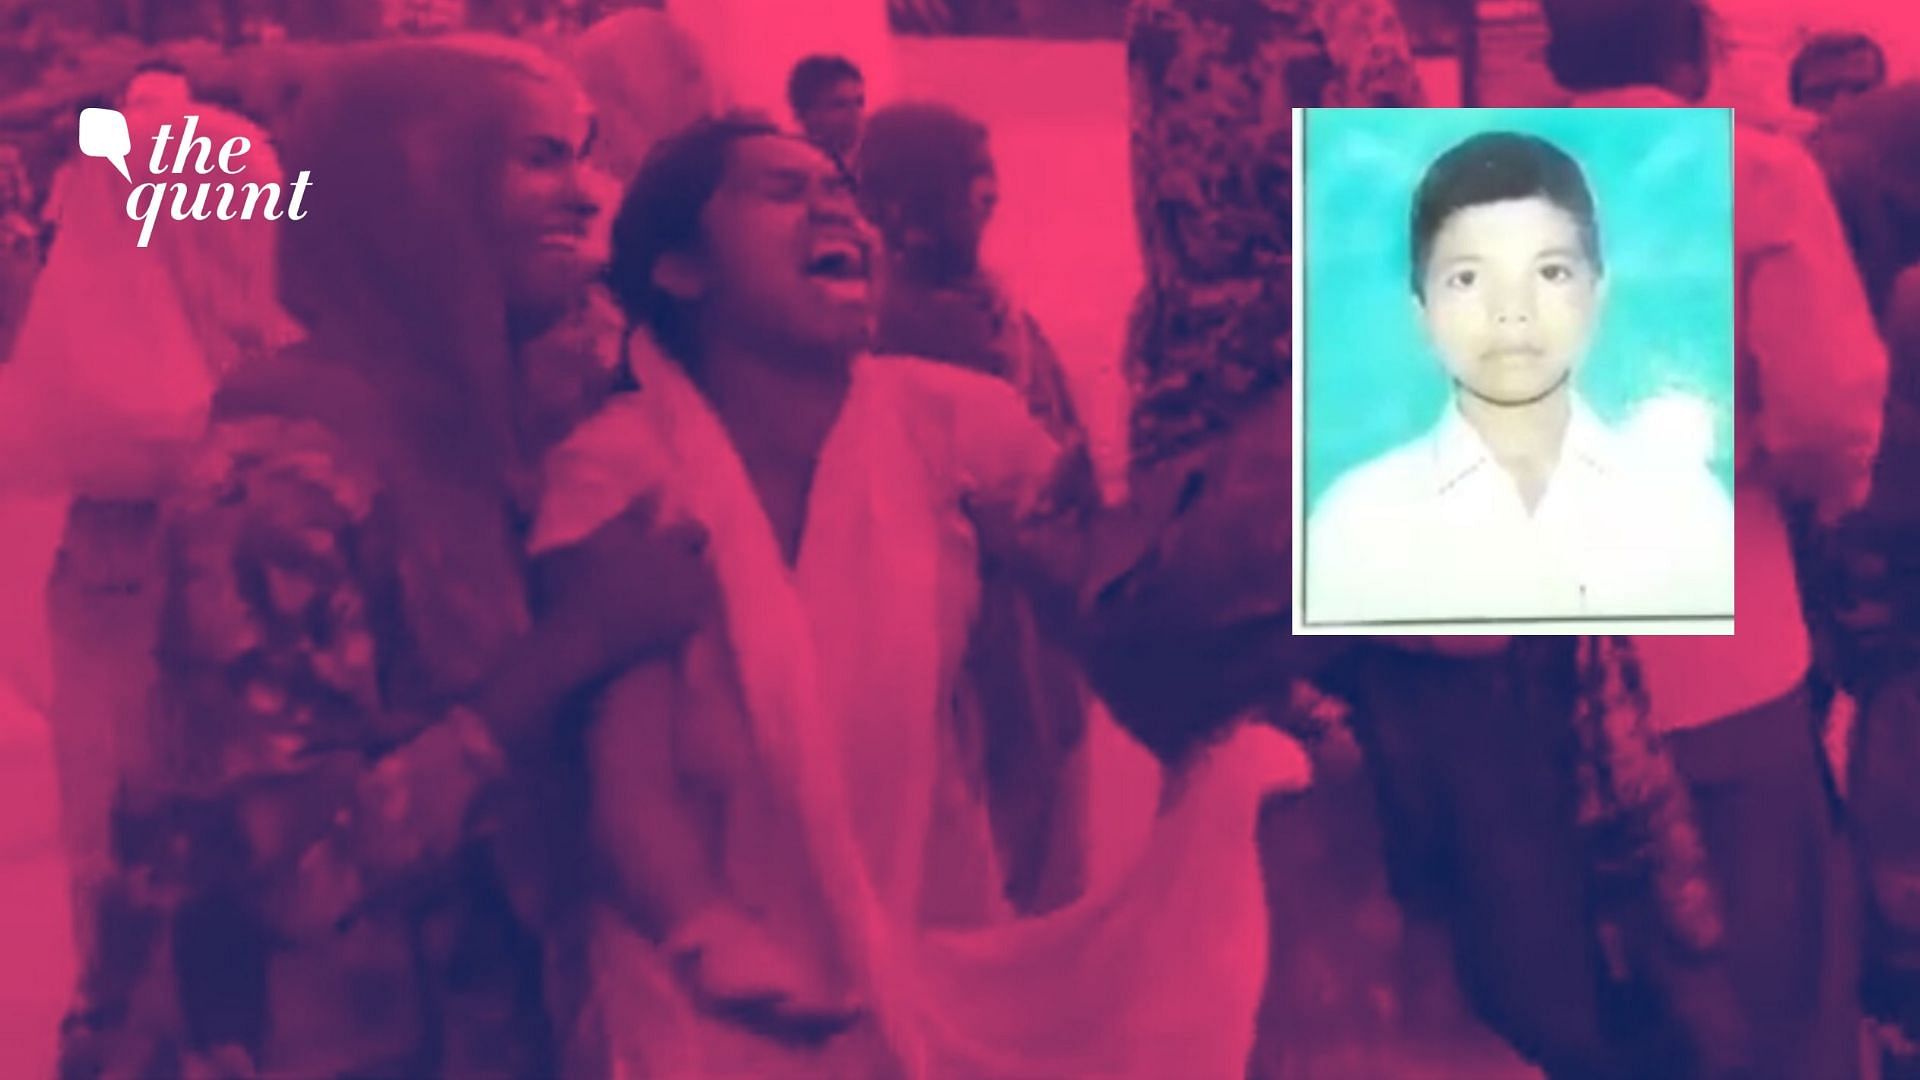 Vikas Jatav, 17, was shot dead by dominant caste youth allegedly because he defied their objections to enter a temple.